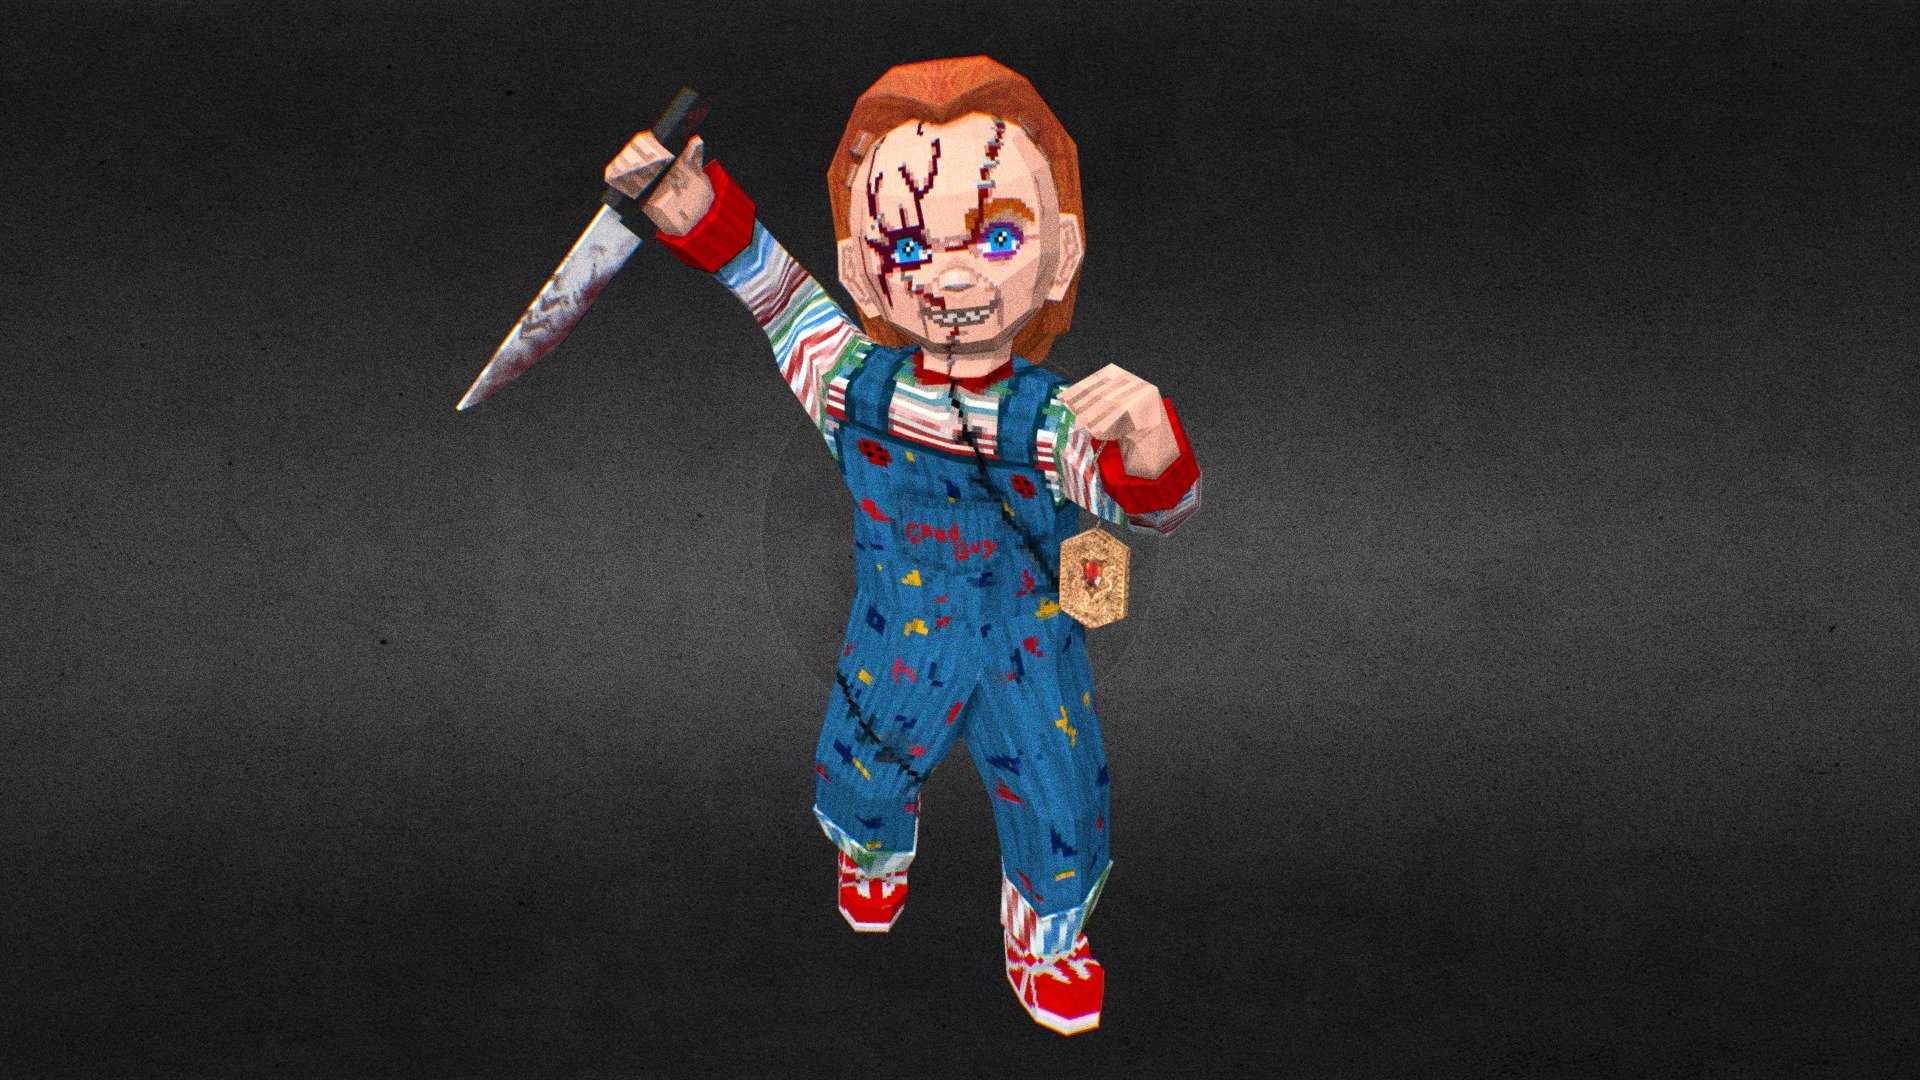 Low poly model of Chucky from Child's Play franchise. Modeled and textured in Blender - Chucky Low Poly PSX Style - 3D model by kalufugo_art 3d model